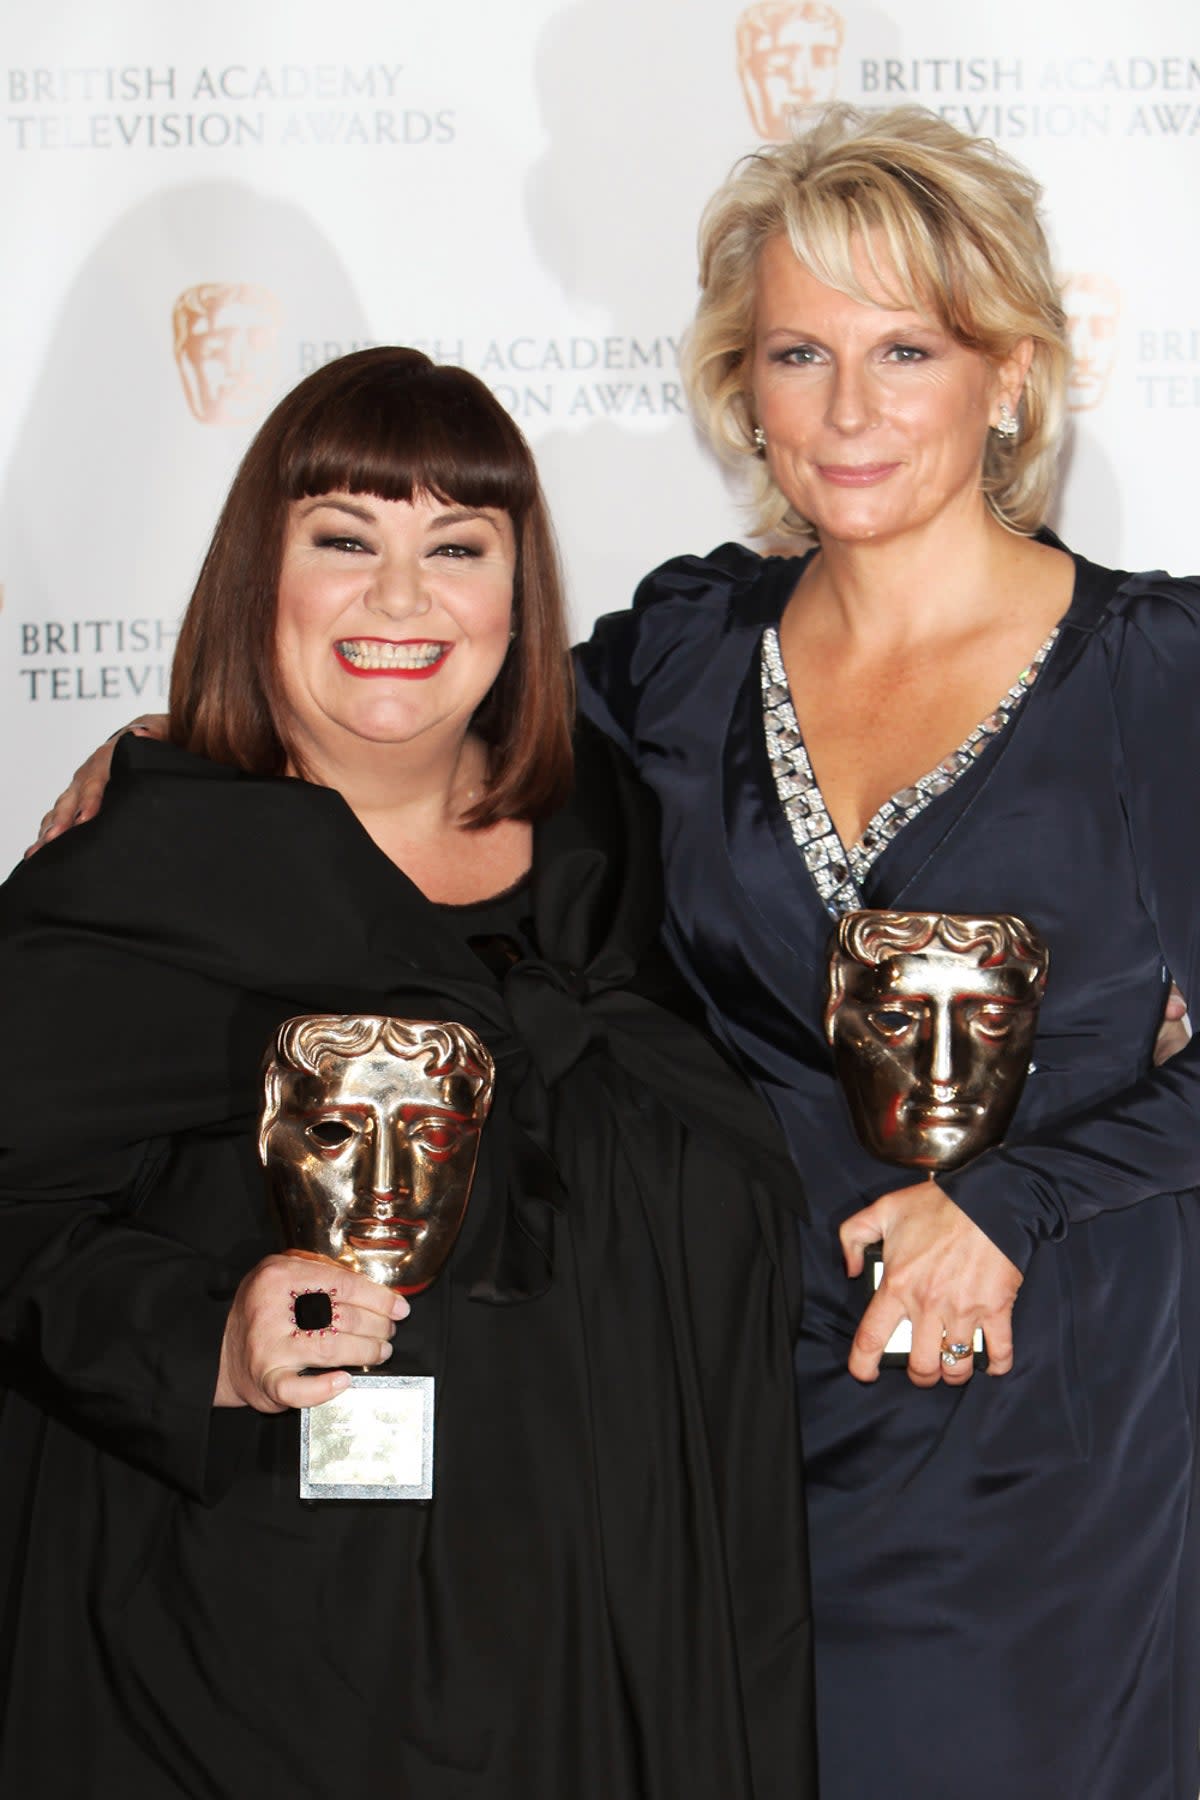 Dawn French discussed the terrifying moment in her new memoir, The T**t Files. Pictured with Jennifer Saunders in 2009 (Tim Whitby/Getty Images)